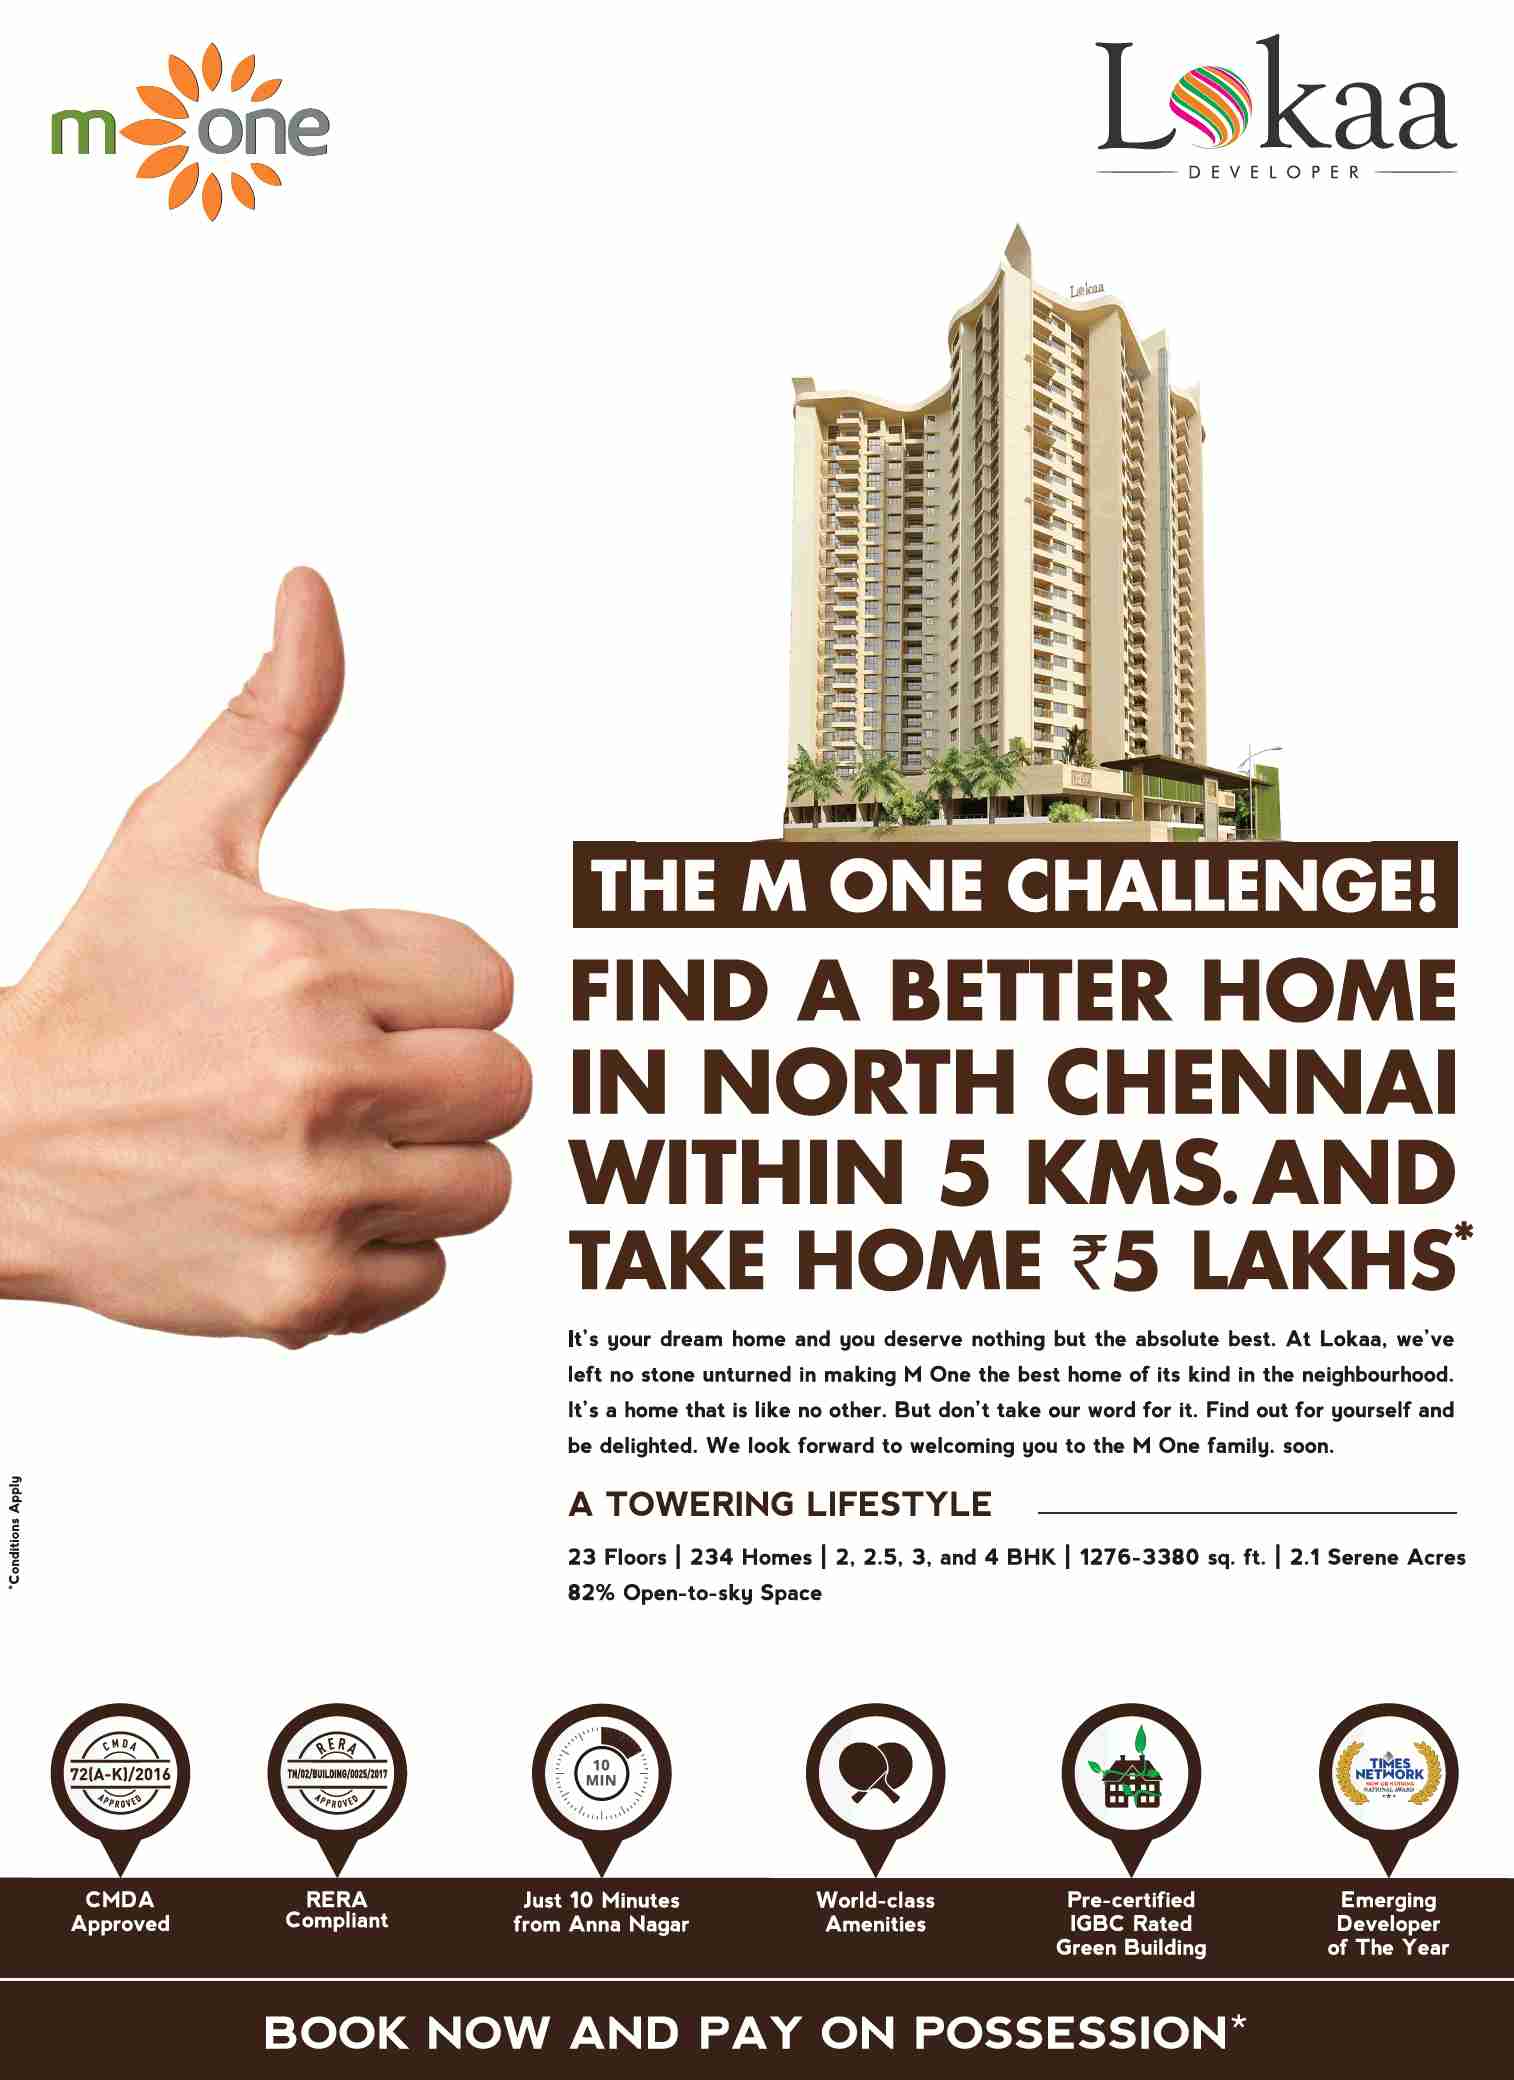 Book now and pay on possession at Lokaa M One in Madhavaram, Chennai Update